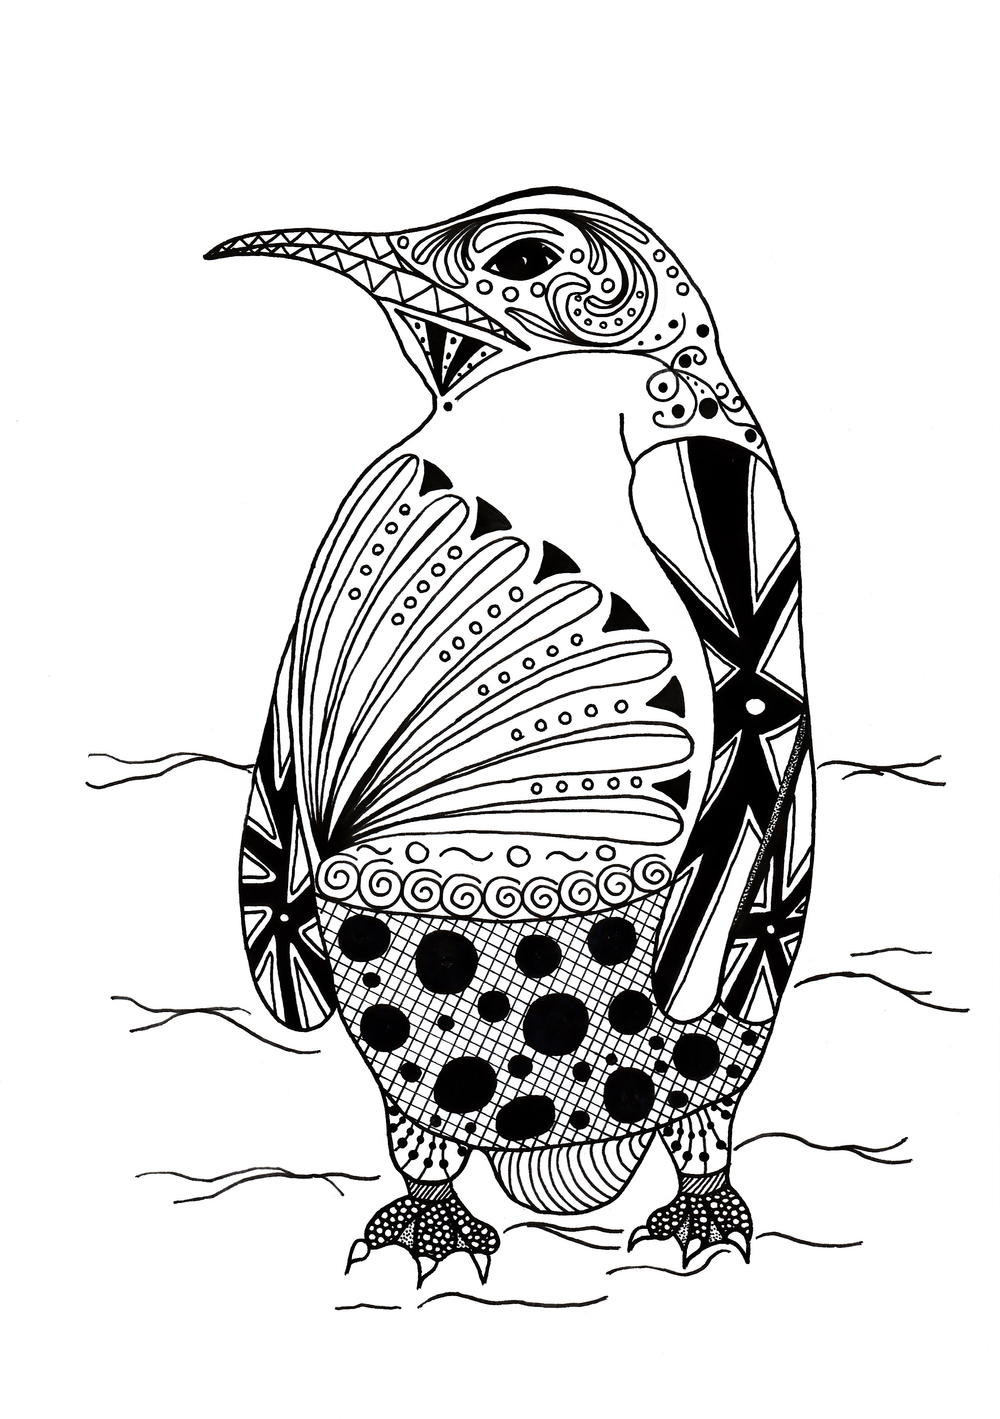 Adult Coloring Book Pictures
 Intricate Penguin Adult Coloring Page